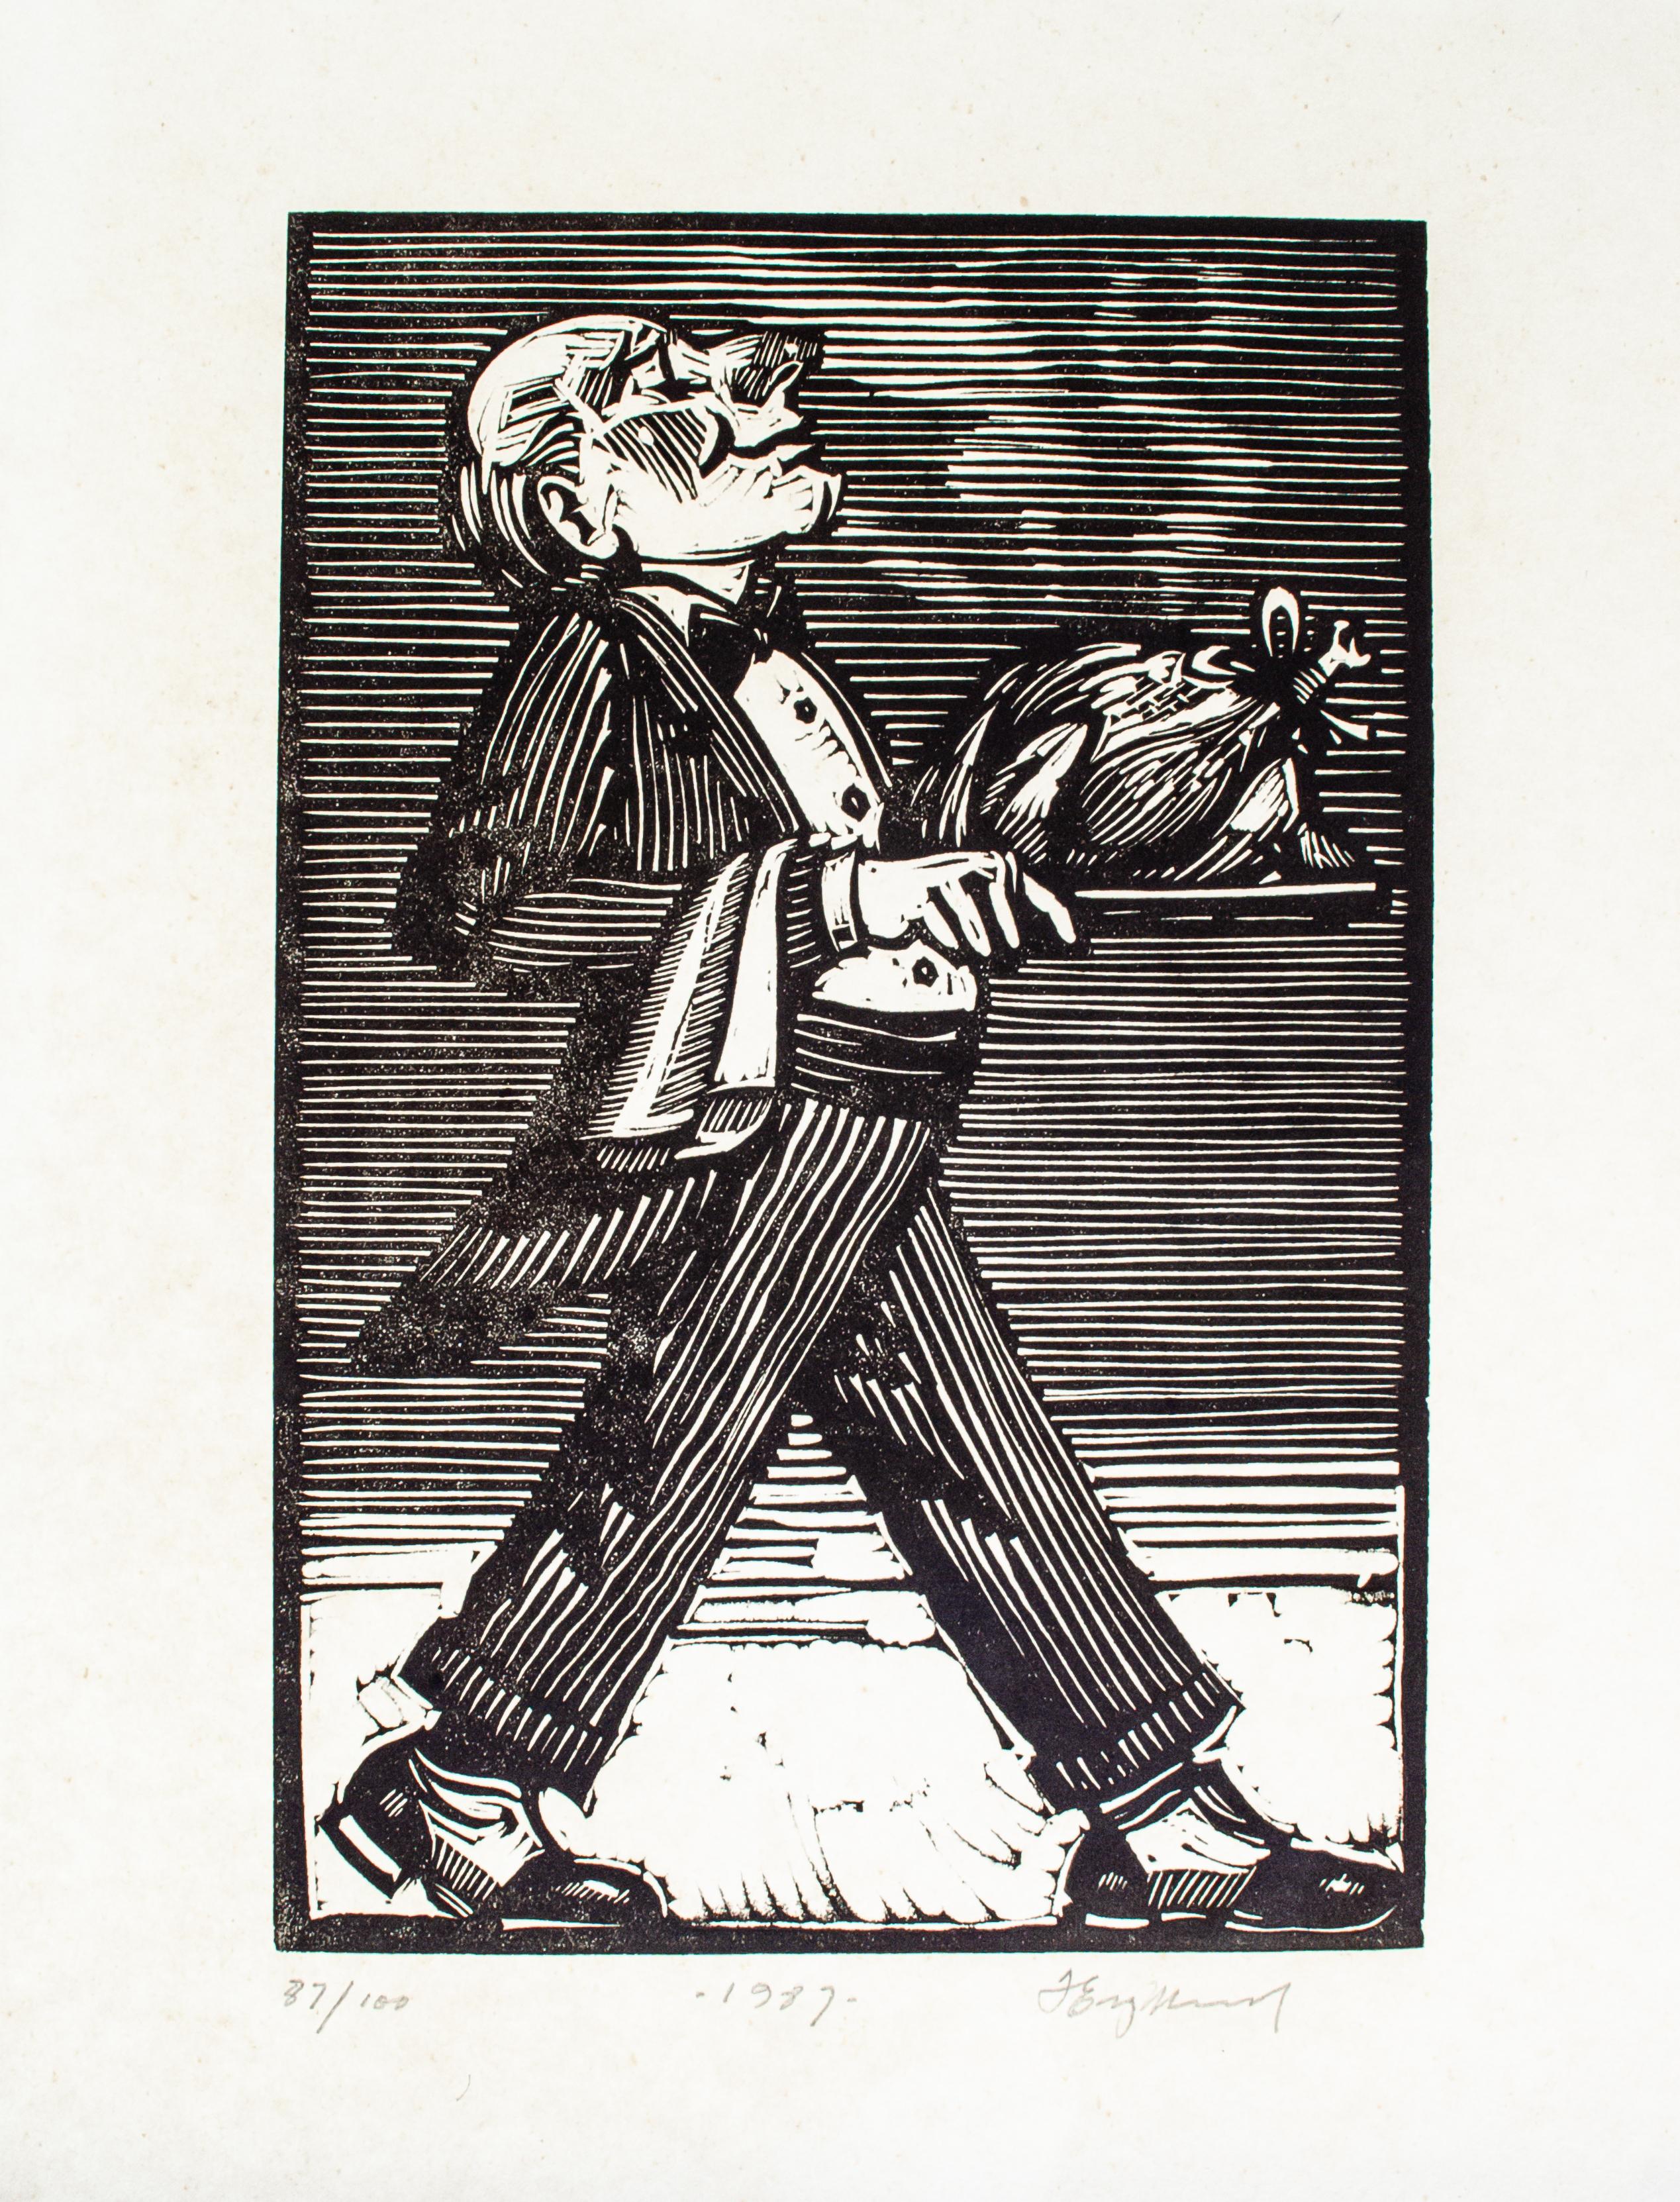 Tim Engelland (American, 1950-2012)
Untitled (Waiter), 1987
Woodcut 
11 x 8 1/2 in.
Numbered, dated, and signed bottom: 87/100, 1987, T. Engelland

A lifelong artist, Engelland specialized in oil portraits and landscapes, and also worked extensively